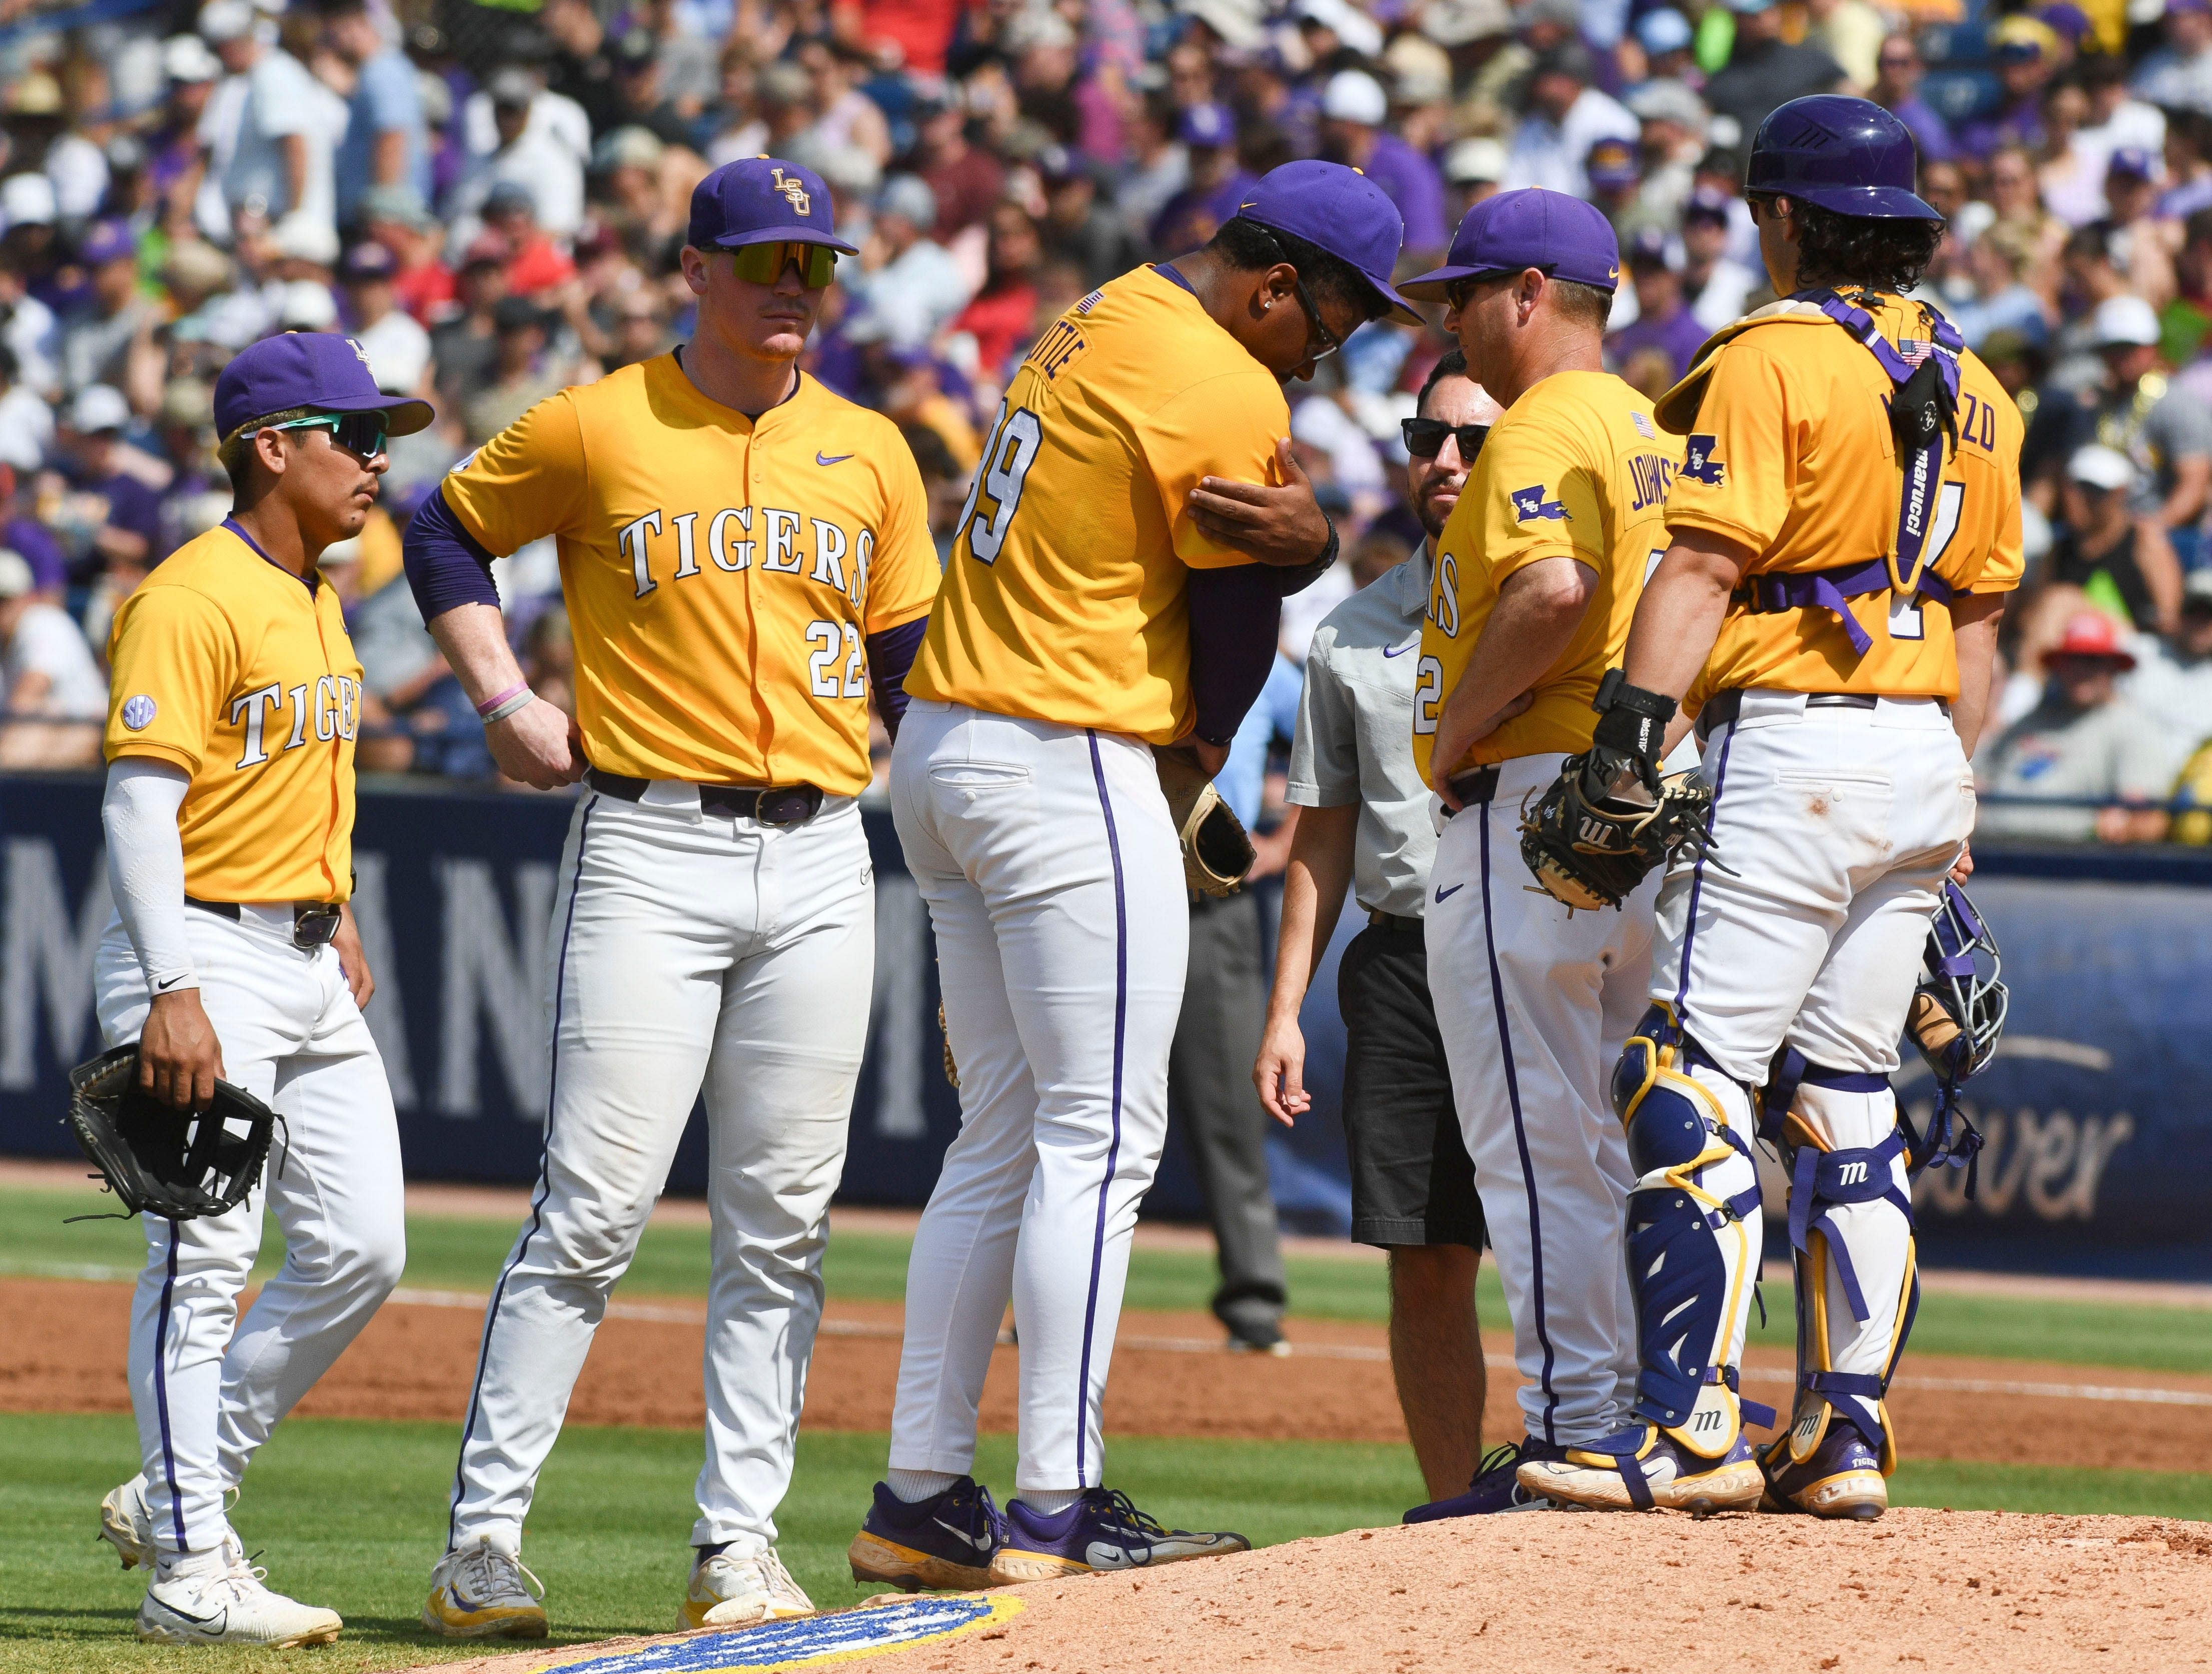 The LSU Tigers fell 4-3 to the Tennessee Volunteers in the SEC Tournament championship game on Sunday.